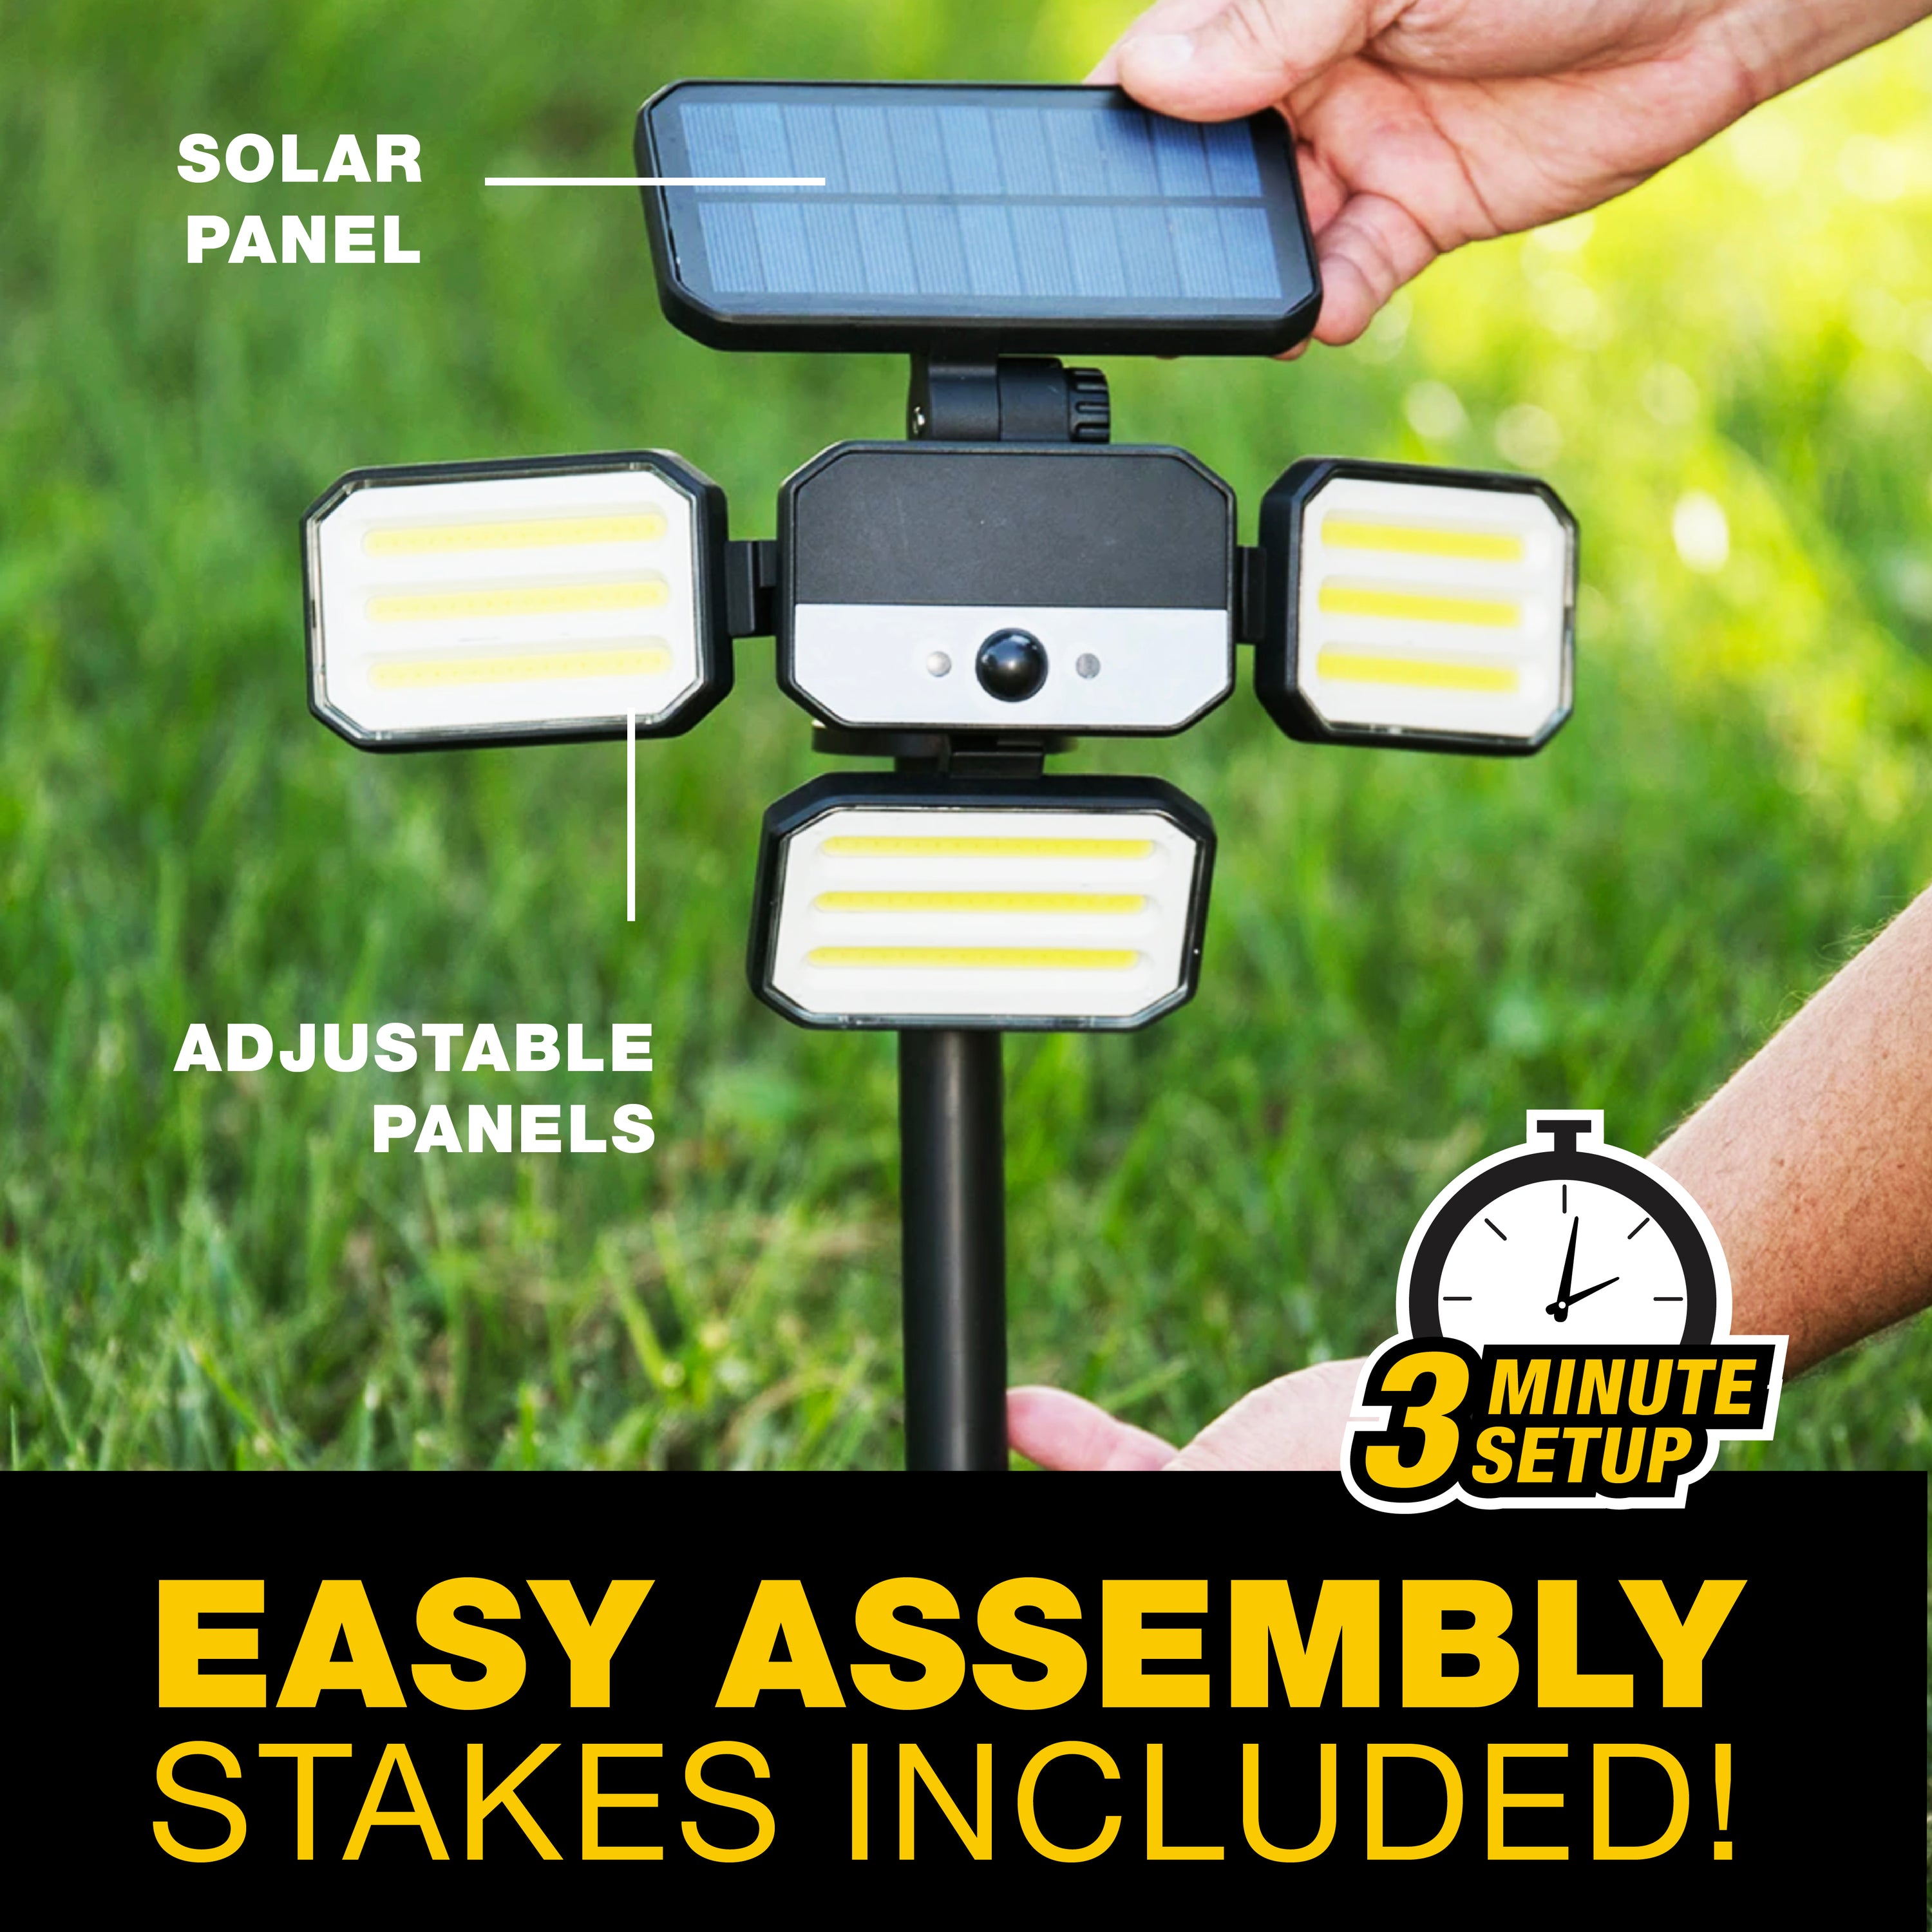 The Original Bell + Howell Bionic Remote Controlled Motion Activated Solar Floodlight